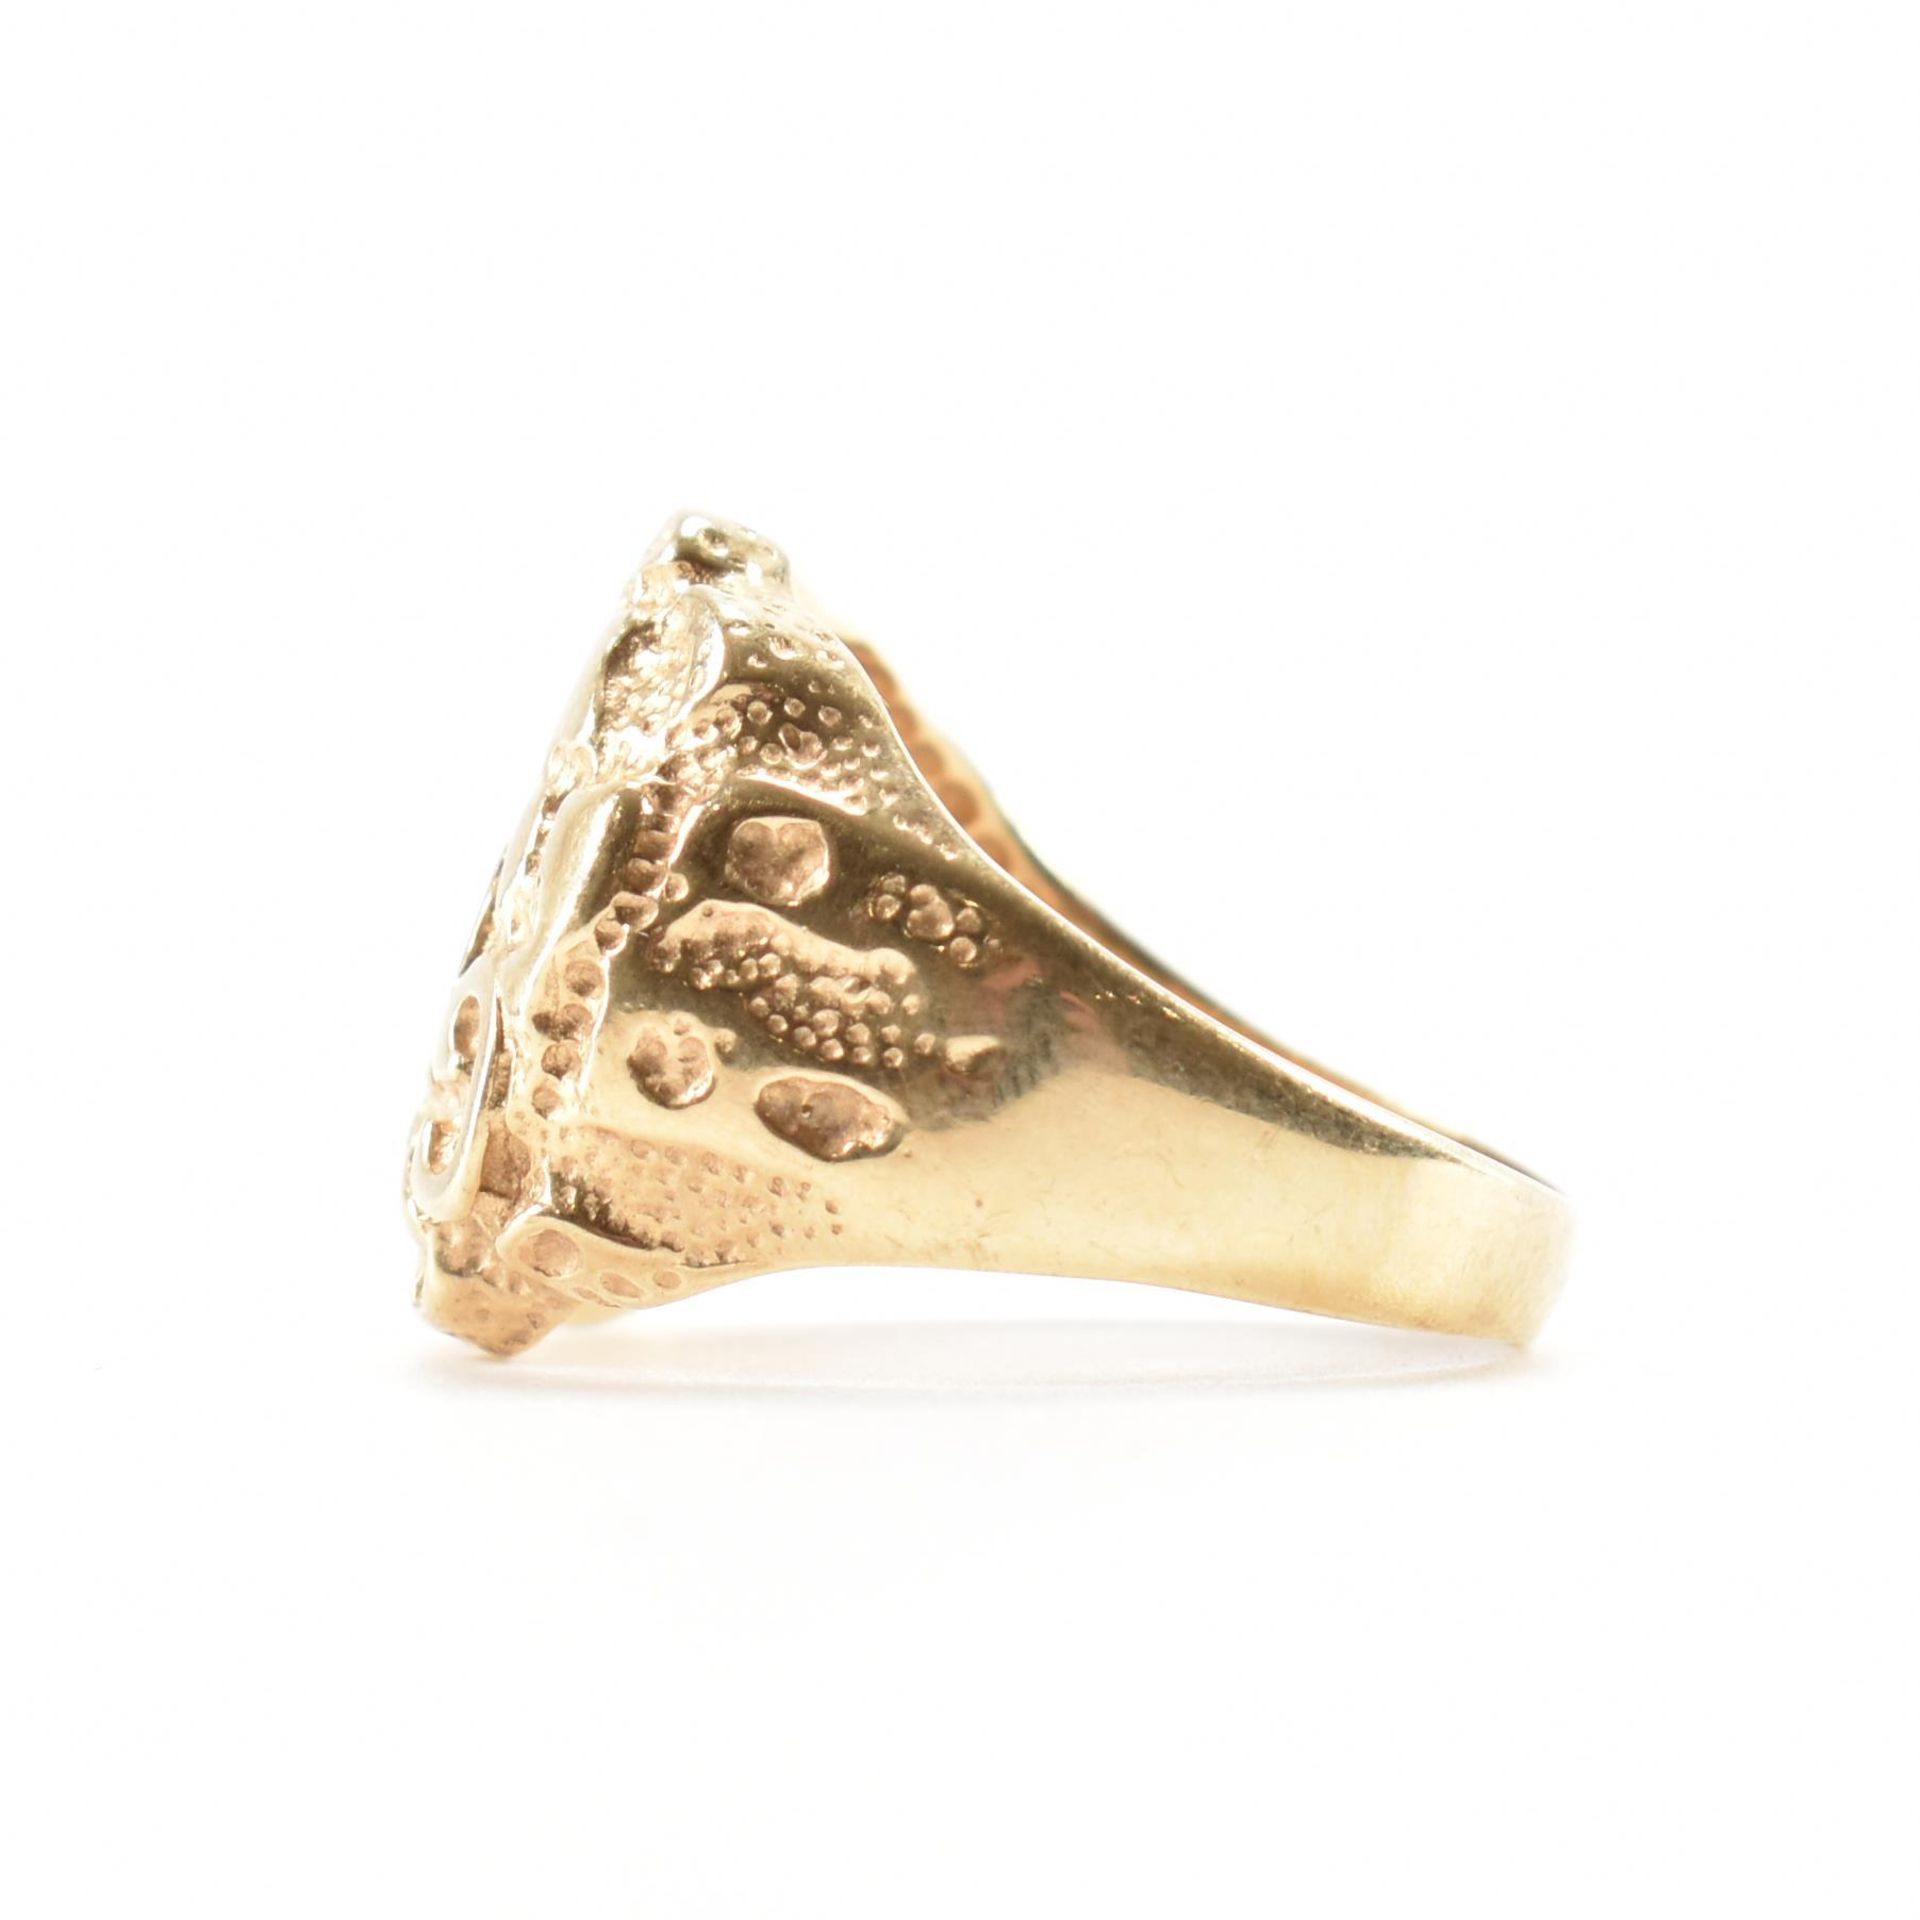 HALLMARKED 9CT GOLD NUGGET RING - Image 2 of 9